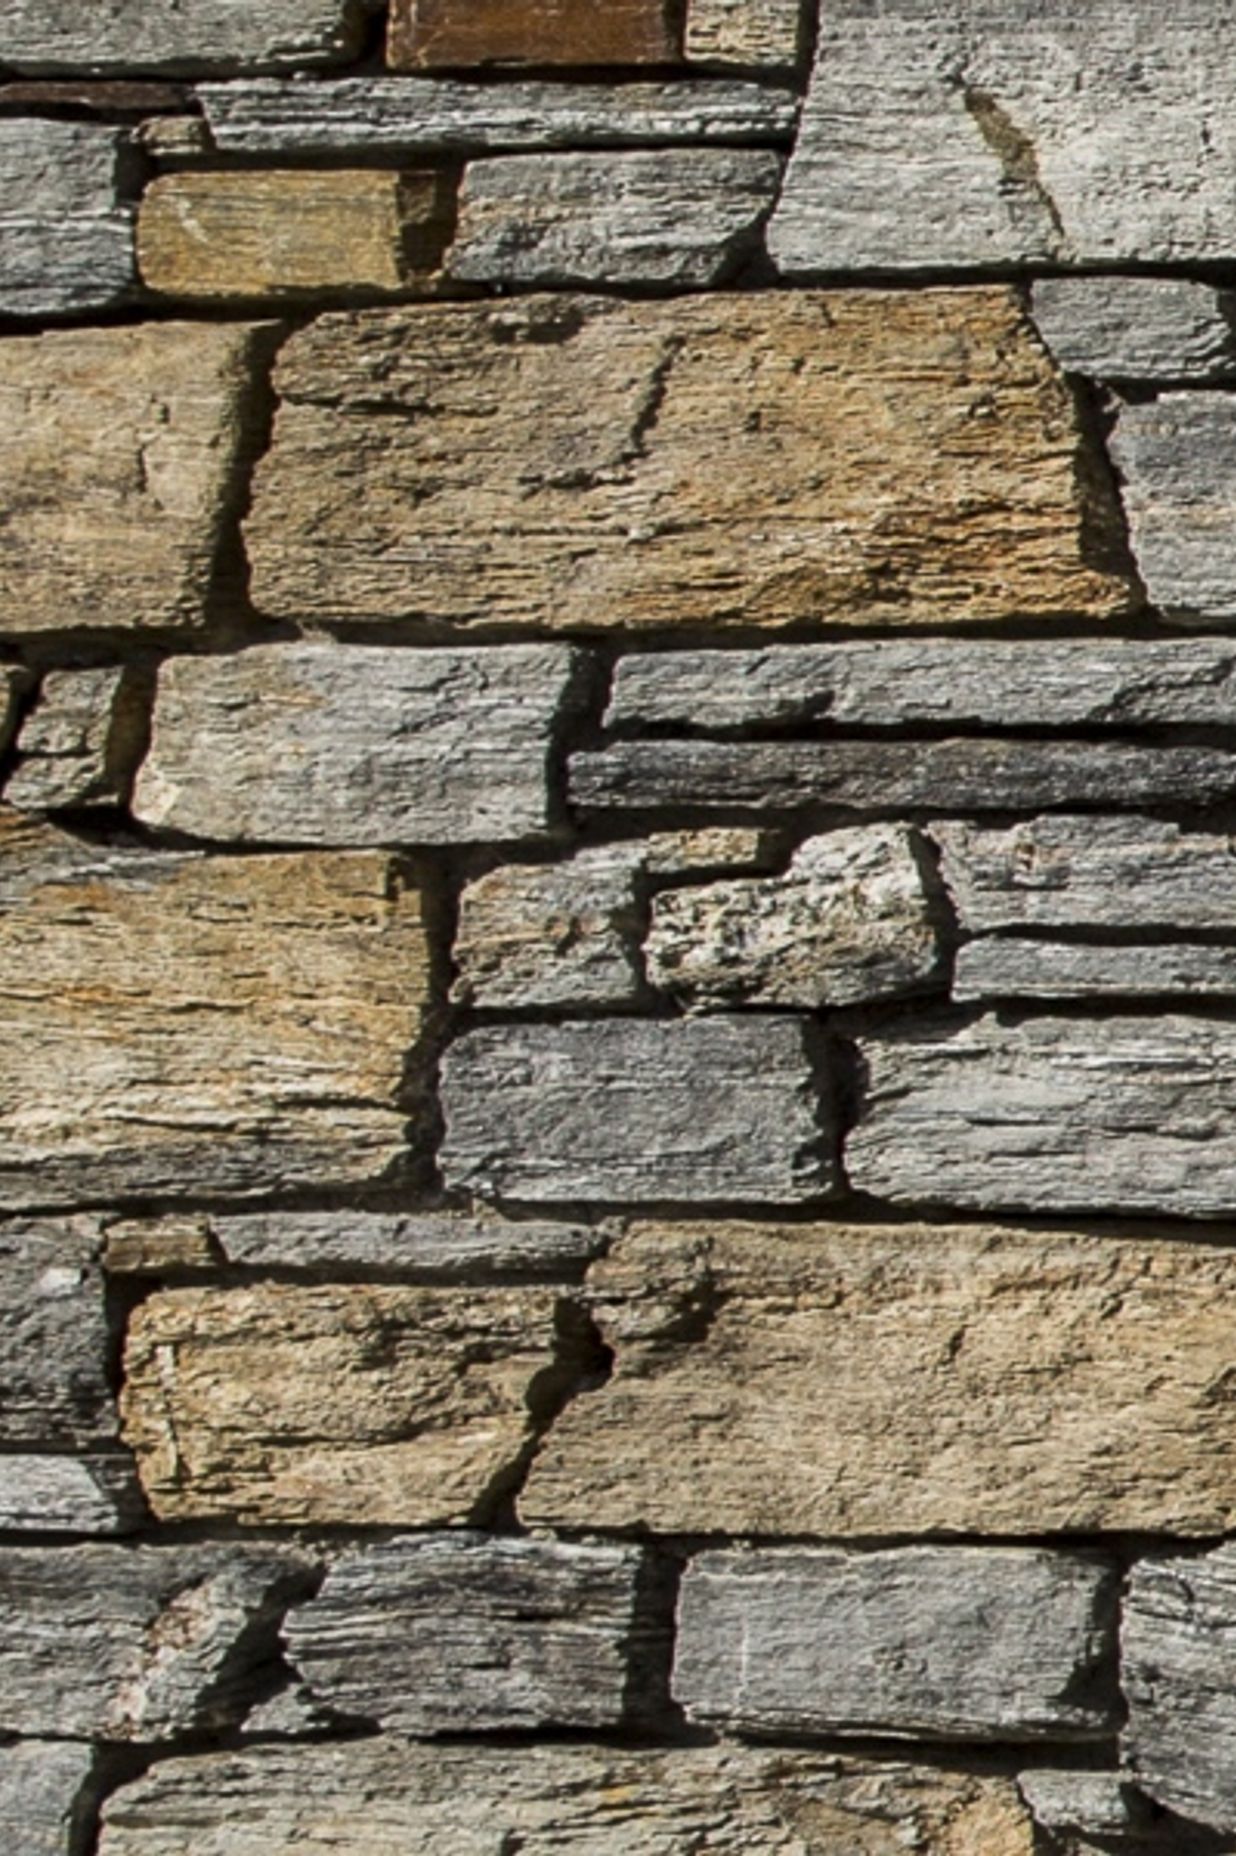 Poolburn Blend: Mixed colour stone has a blend of grey and brown stone. The ratio of the blend changes depending on the location in the quarry. The various tones of brown and grey blend together to create a dramatic and quintessential Central Otago stone 